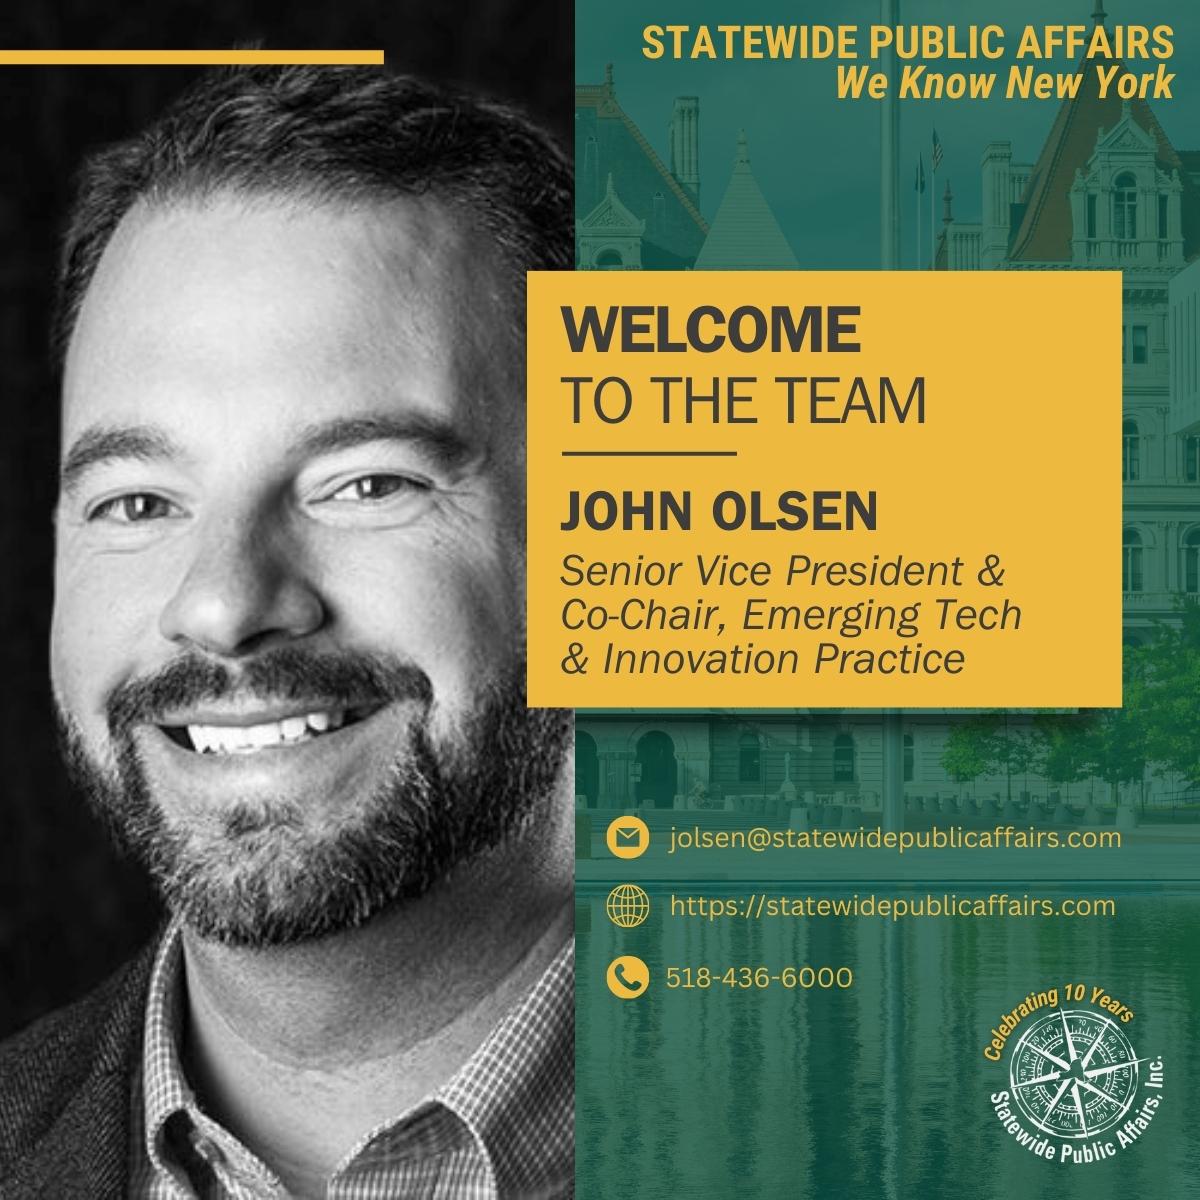 📢We're excited to announce that John Olsen is joining the @StatewidePA team as SVP and Co-Chair of a new Emerging Technology & Innovation practice within the firm. 

#Technology #privacy #artificialintelligencetechnology #governmentaffairs